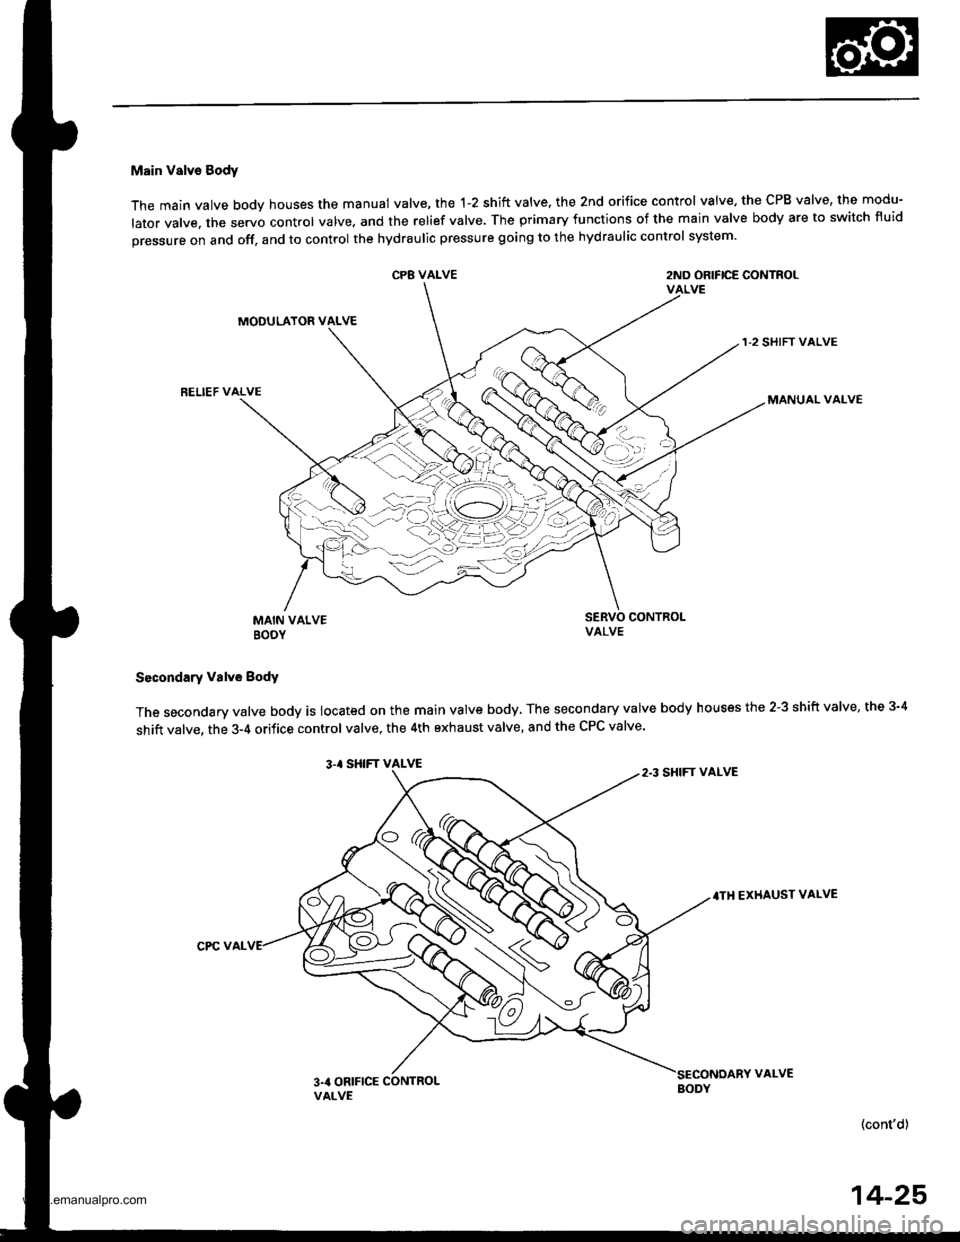 HONDA CR-V 1997 RD1-RD3 / 1.G User Guide 
Main Valve Sody
The main valve body houses the manual valve, the 1-2 shift valve. the 2nd orifice control valve. the CPB valve, the modu-
lator valve. the servo control valve. and the relief valve. T